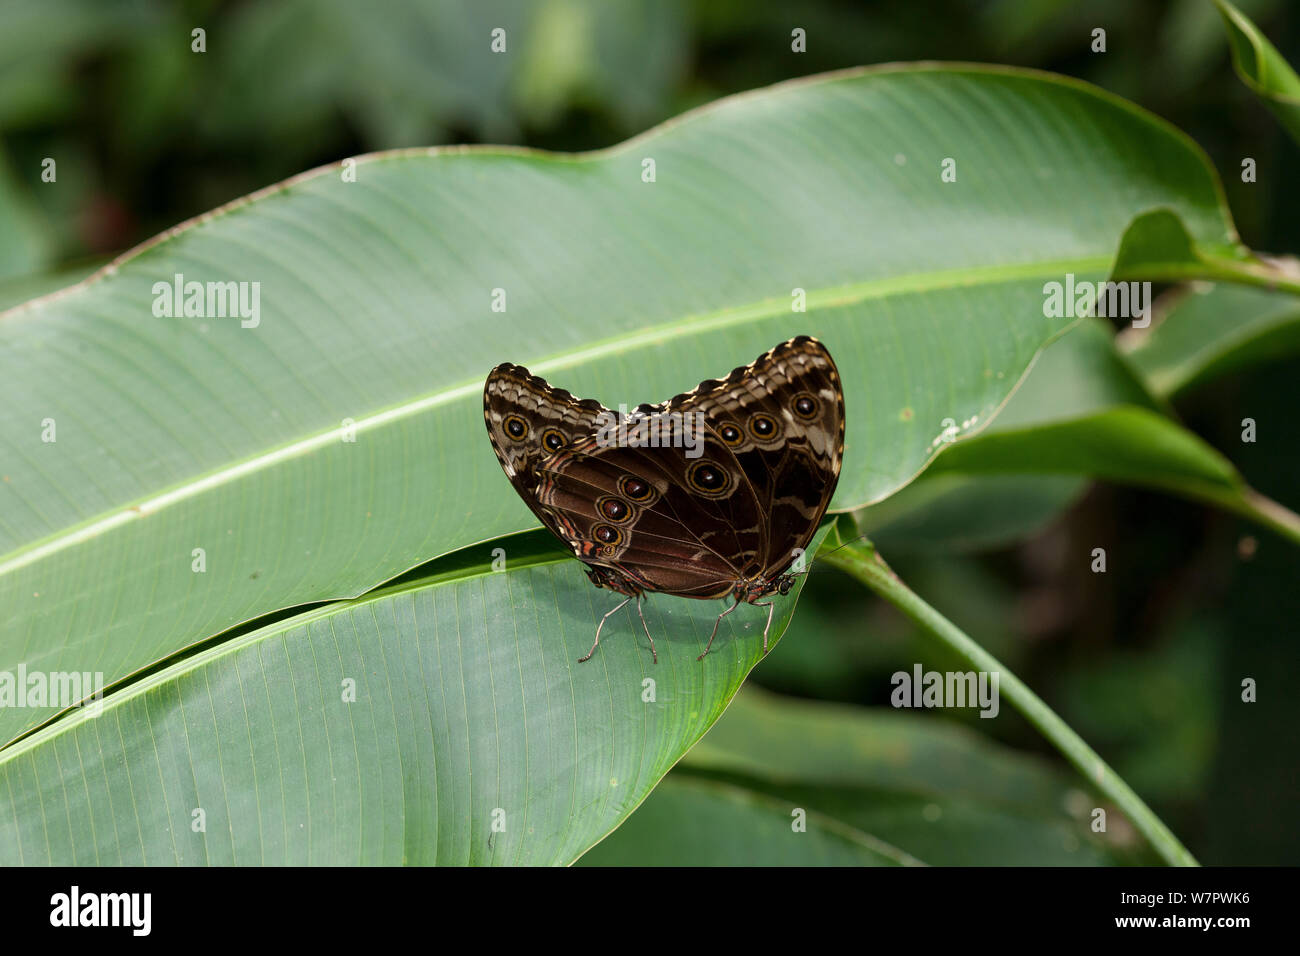 Common morpho butterflies (Morpho peleides) mating? on leaf, Costa rica, Central America Stock Photo